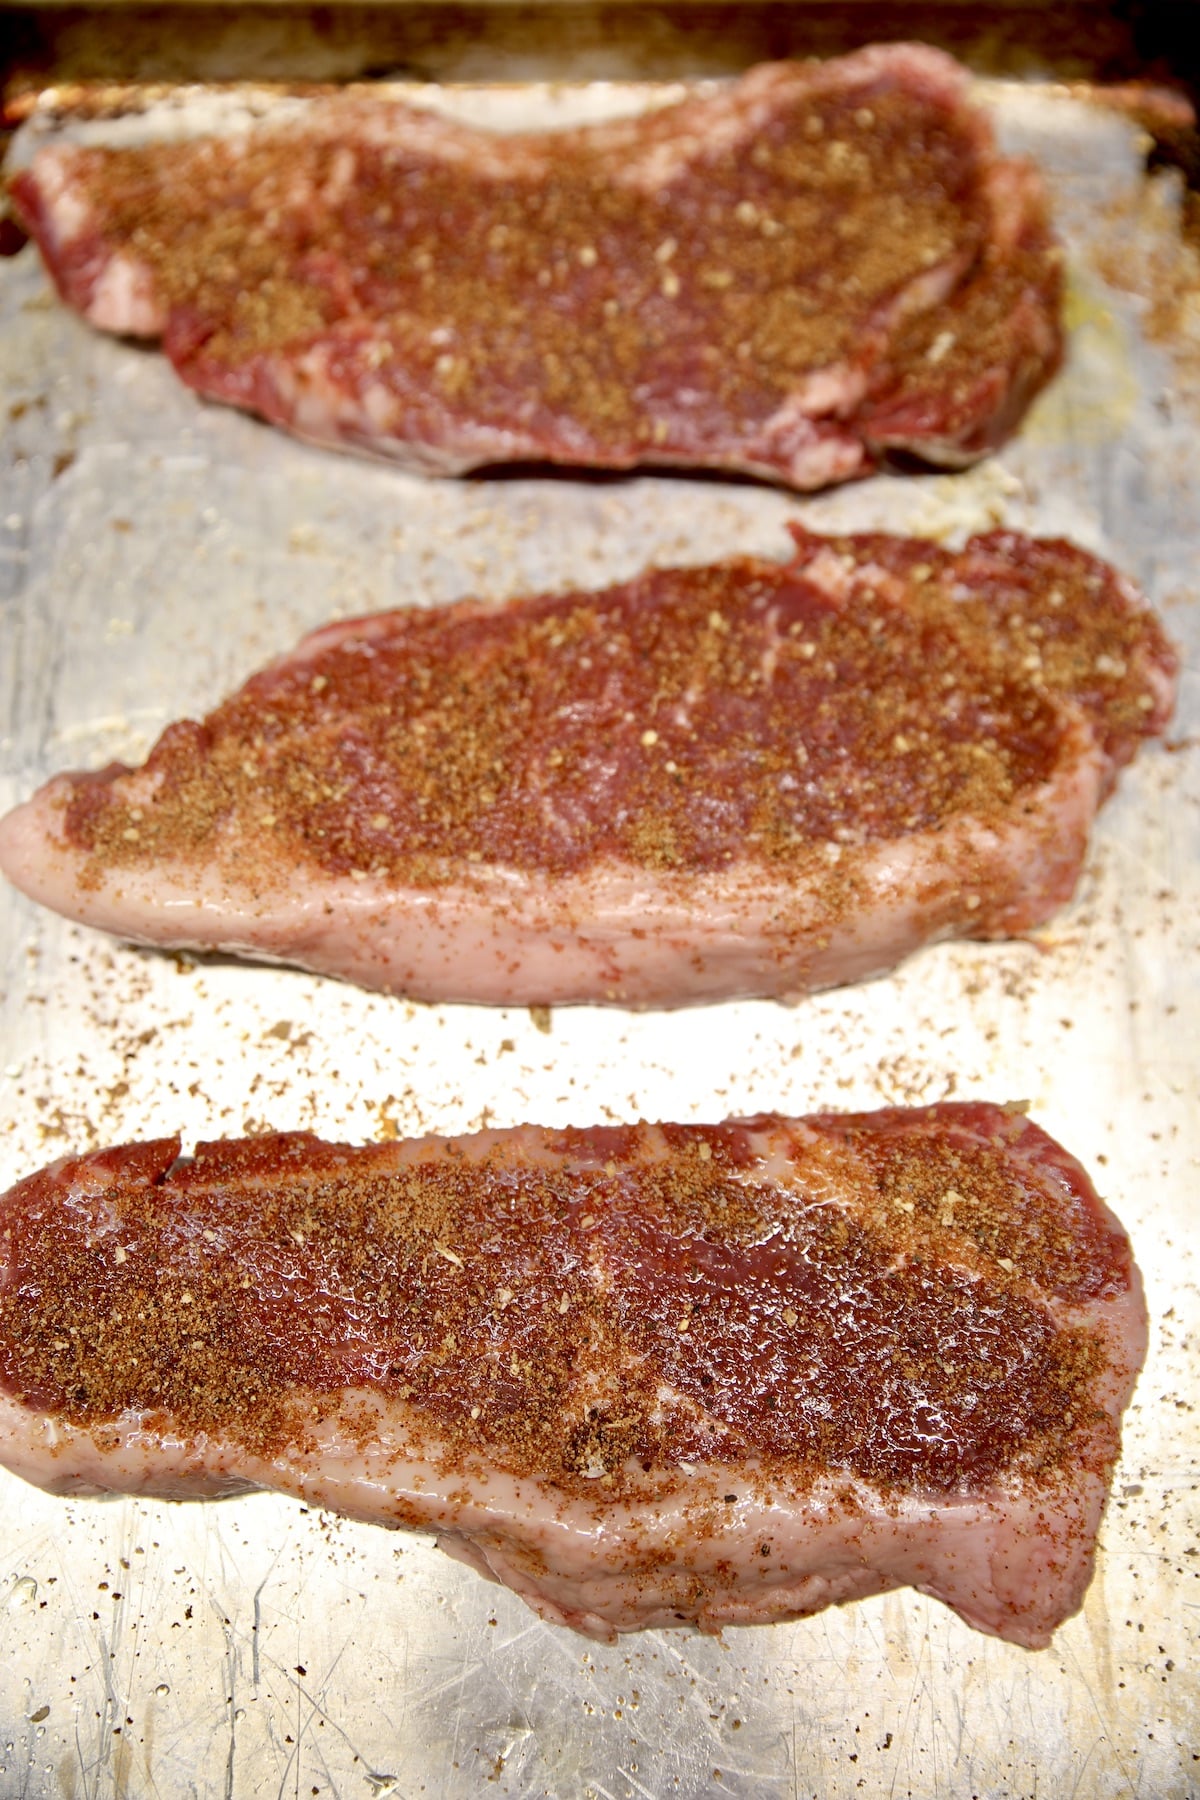 3 NY Strip steaks with dry rub seaoning.